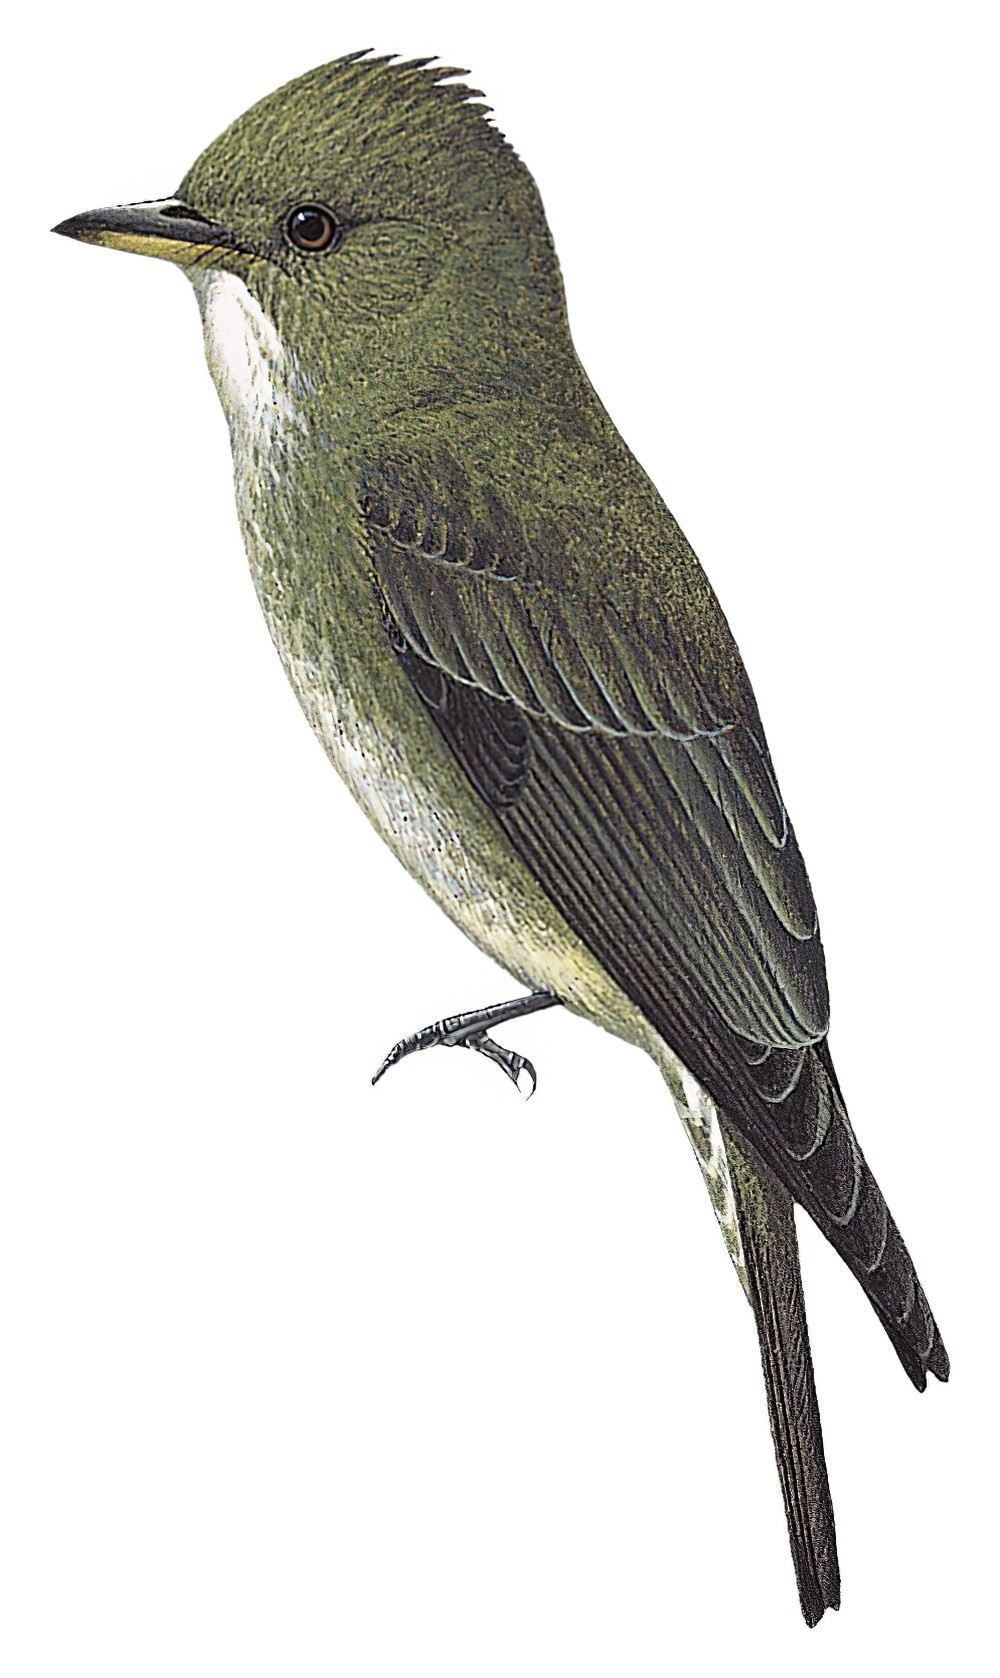 Olive-sided Flycatcher / Contopus cooperi